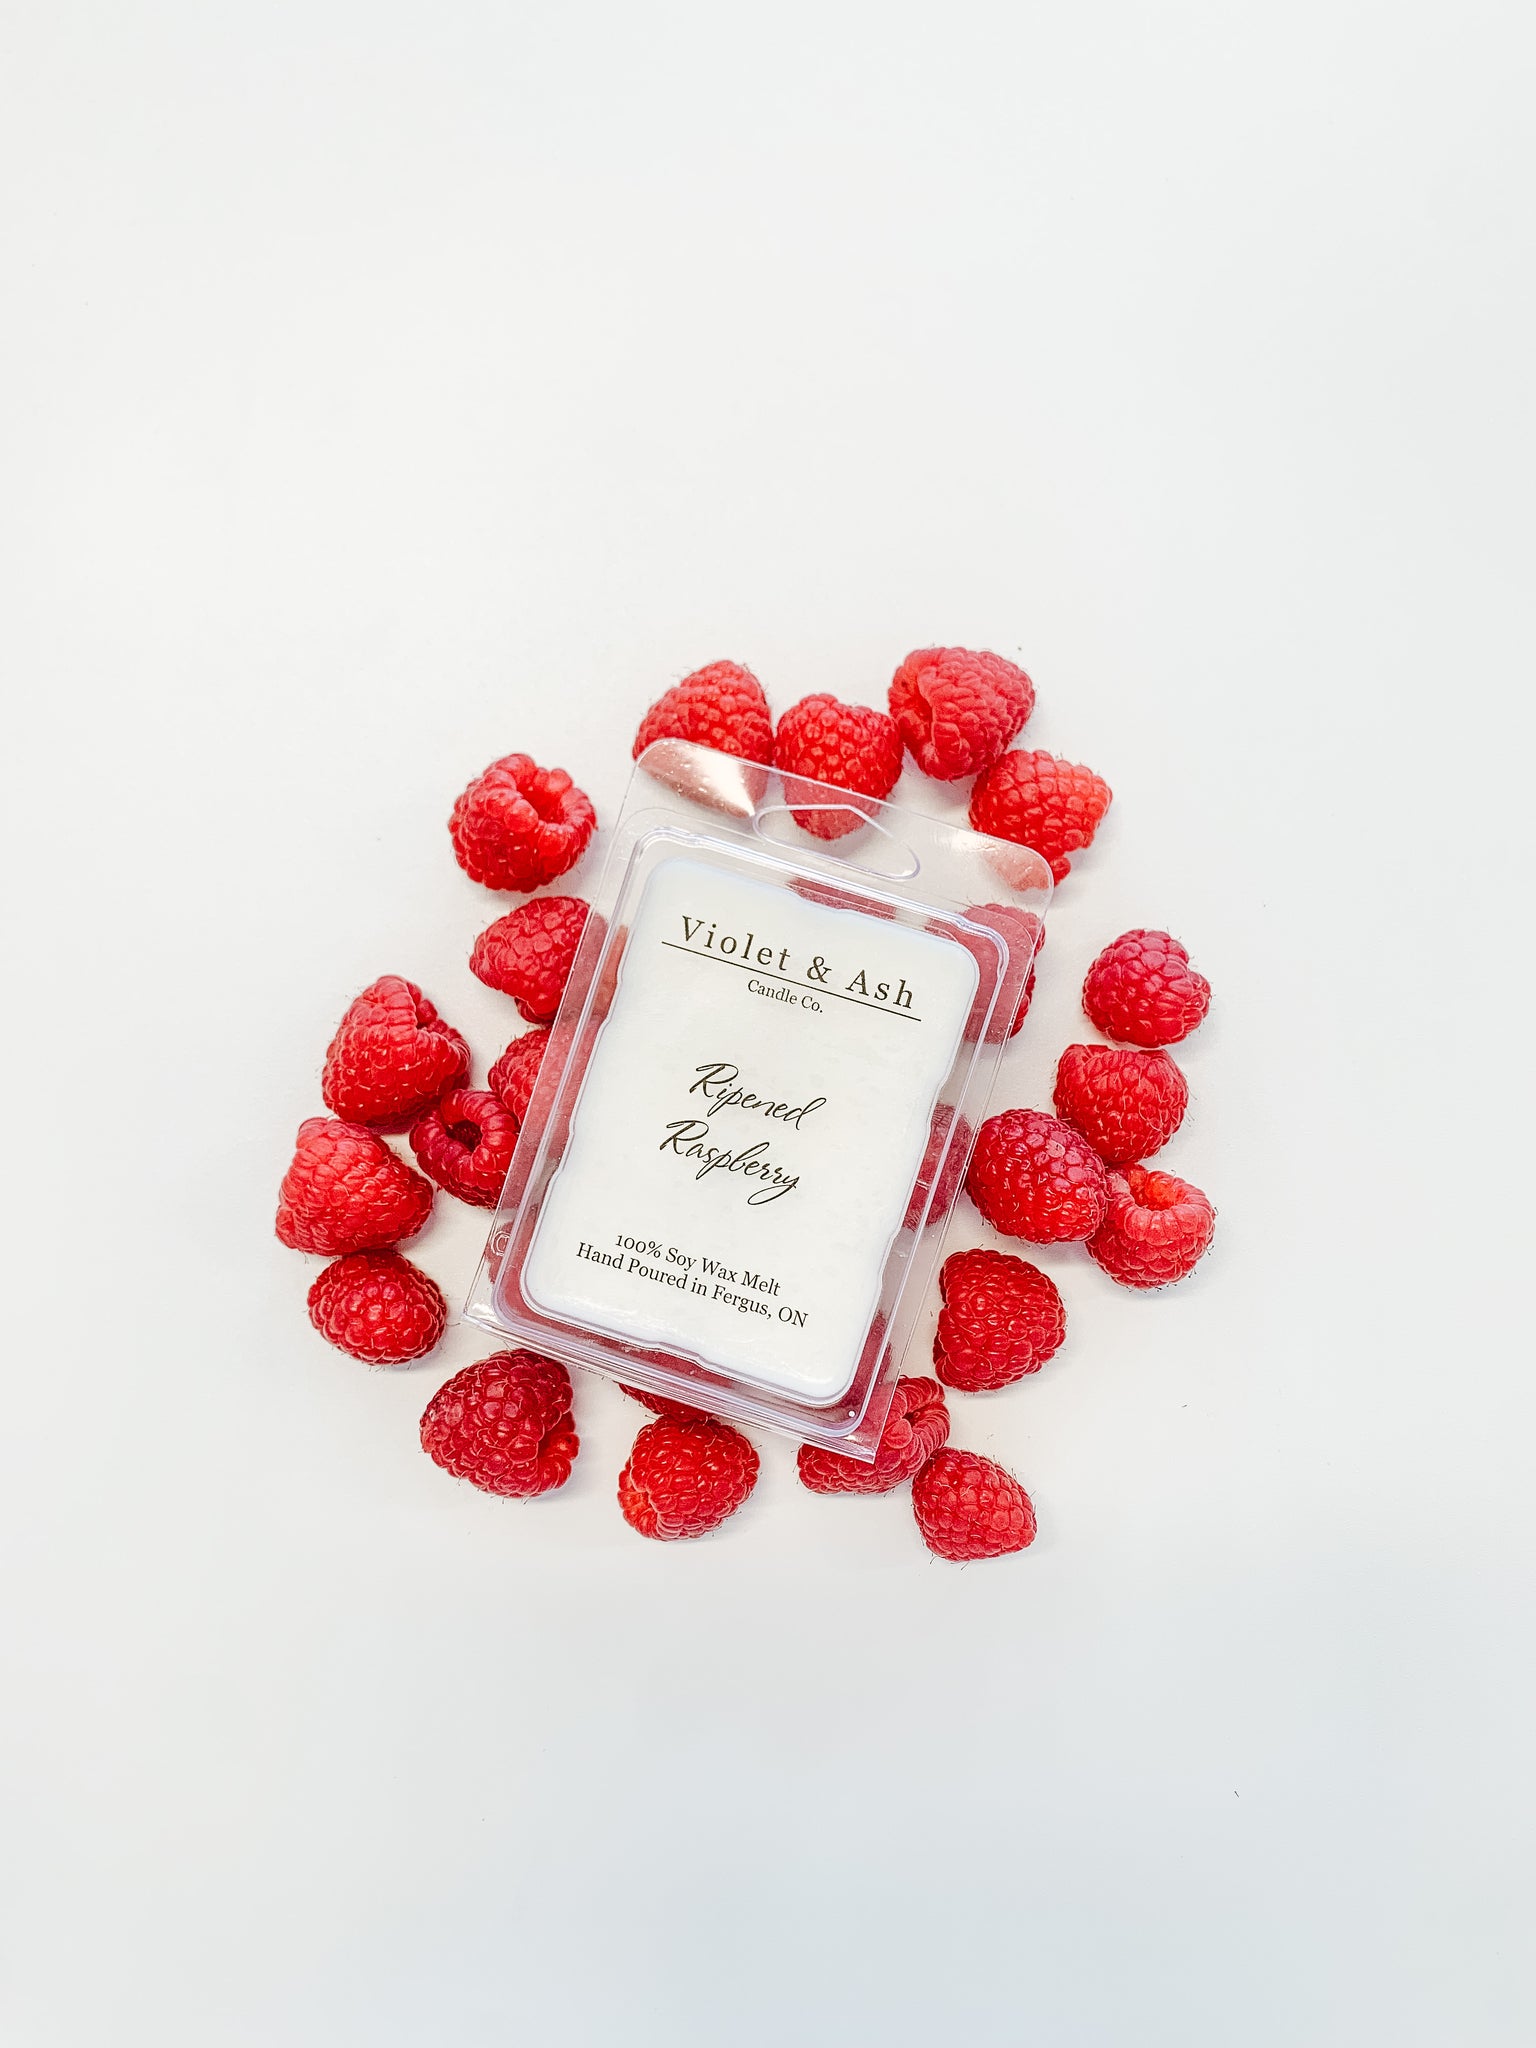 Ripened Raspberry – Violet & Ash Candle Co.